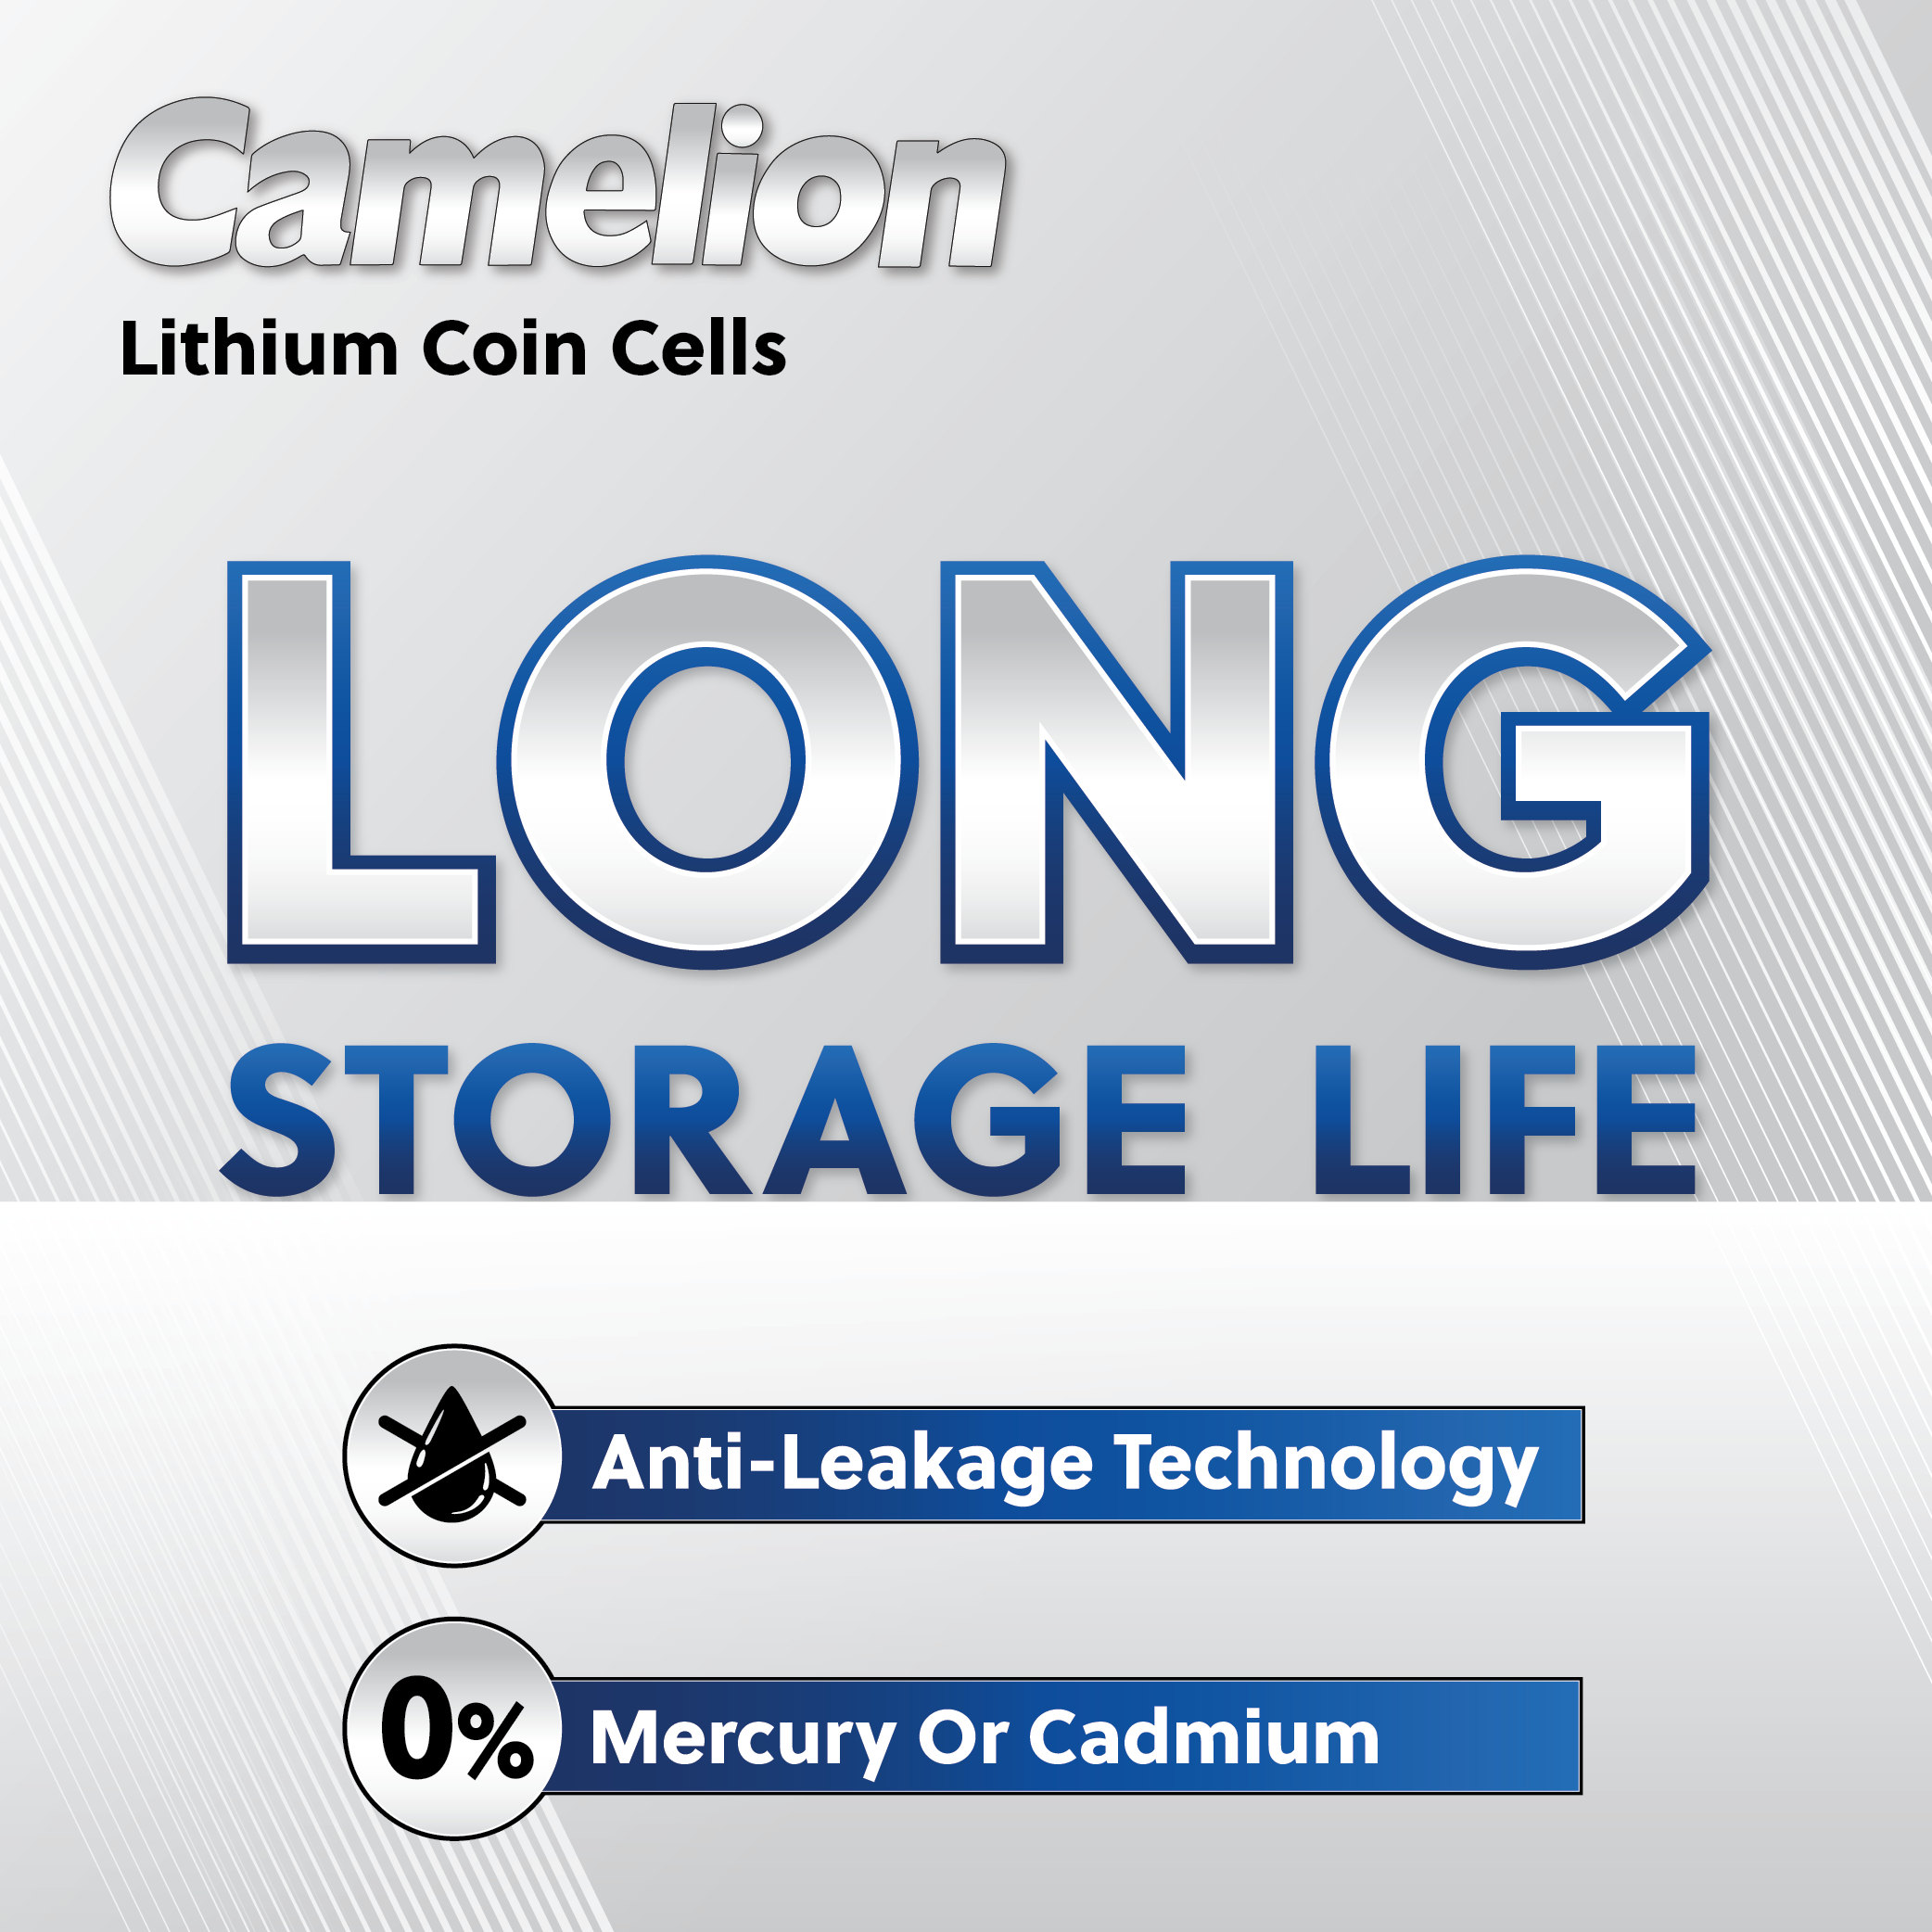 Camelion CR1220 3V Lithium Coin Cell Battery – Batteries 4 Stores